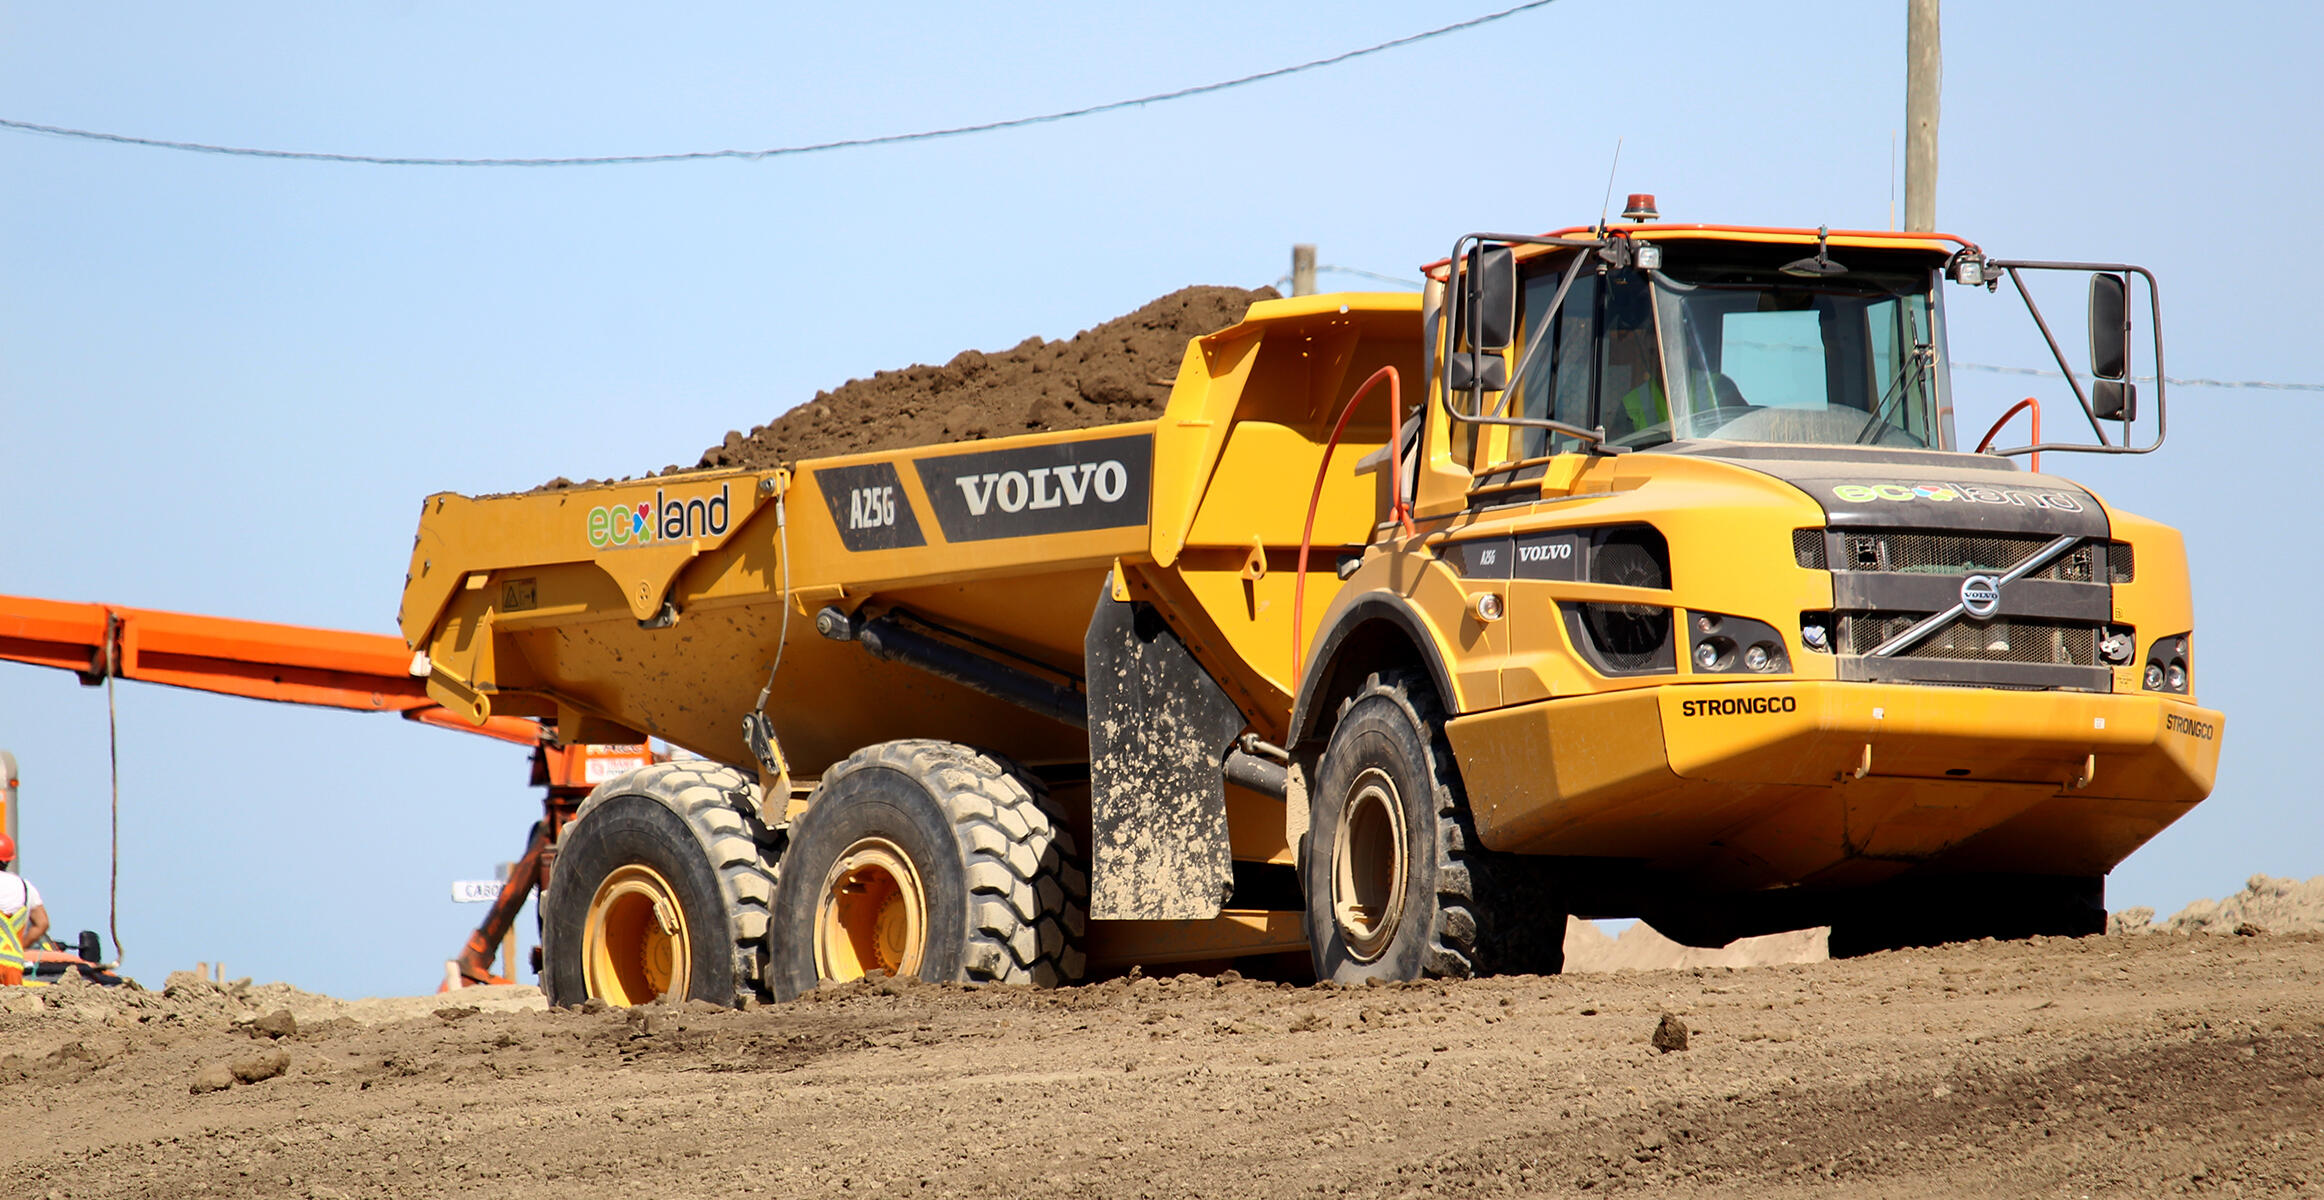 Volvo A25G used by Ecoland in Ontario, CA